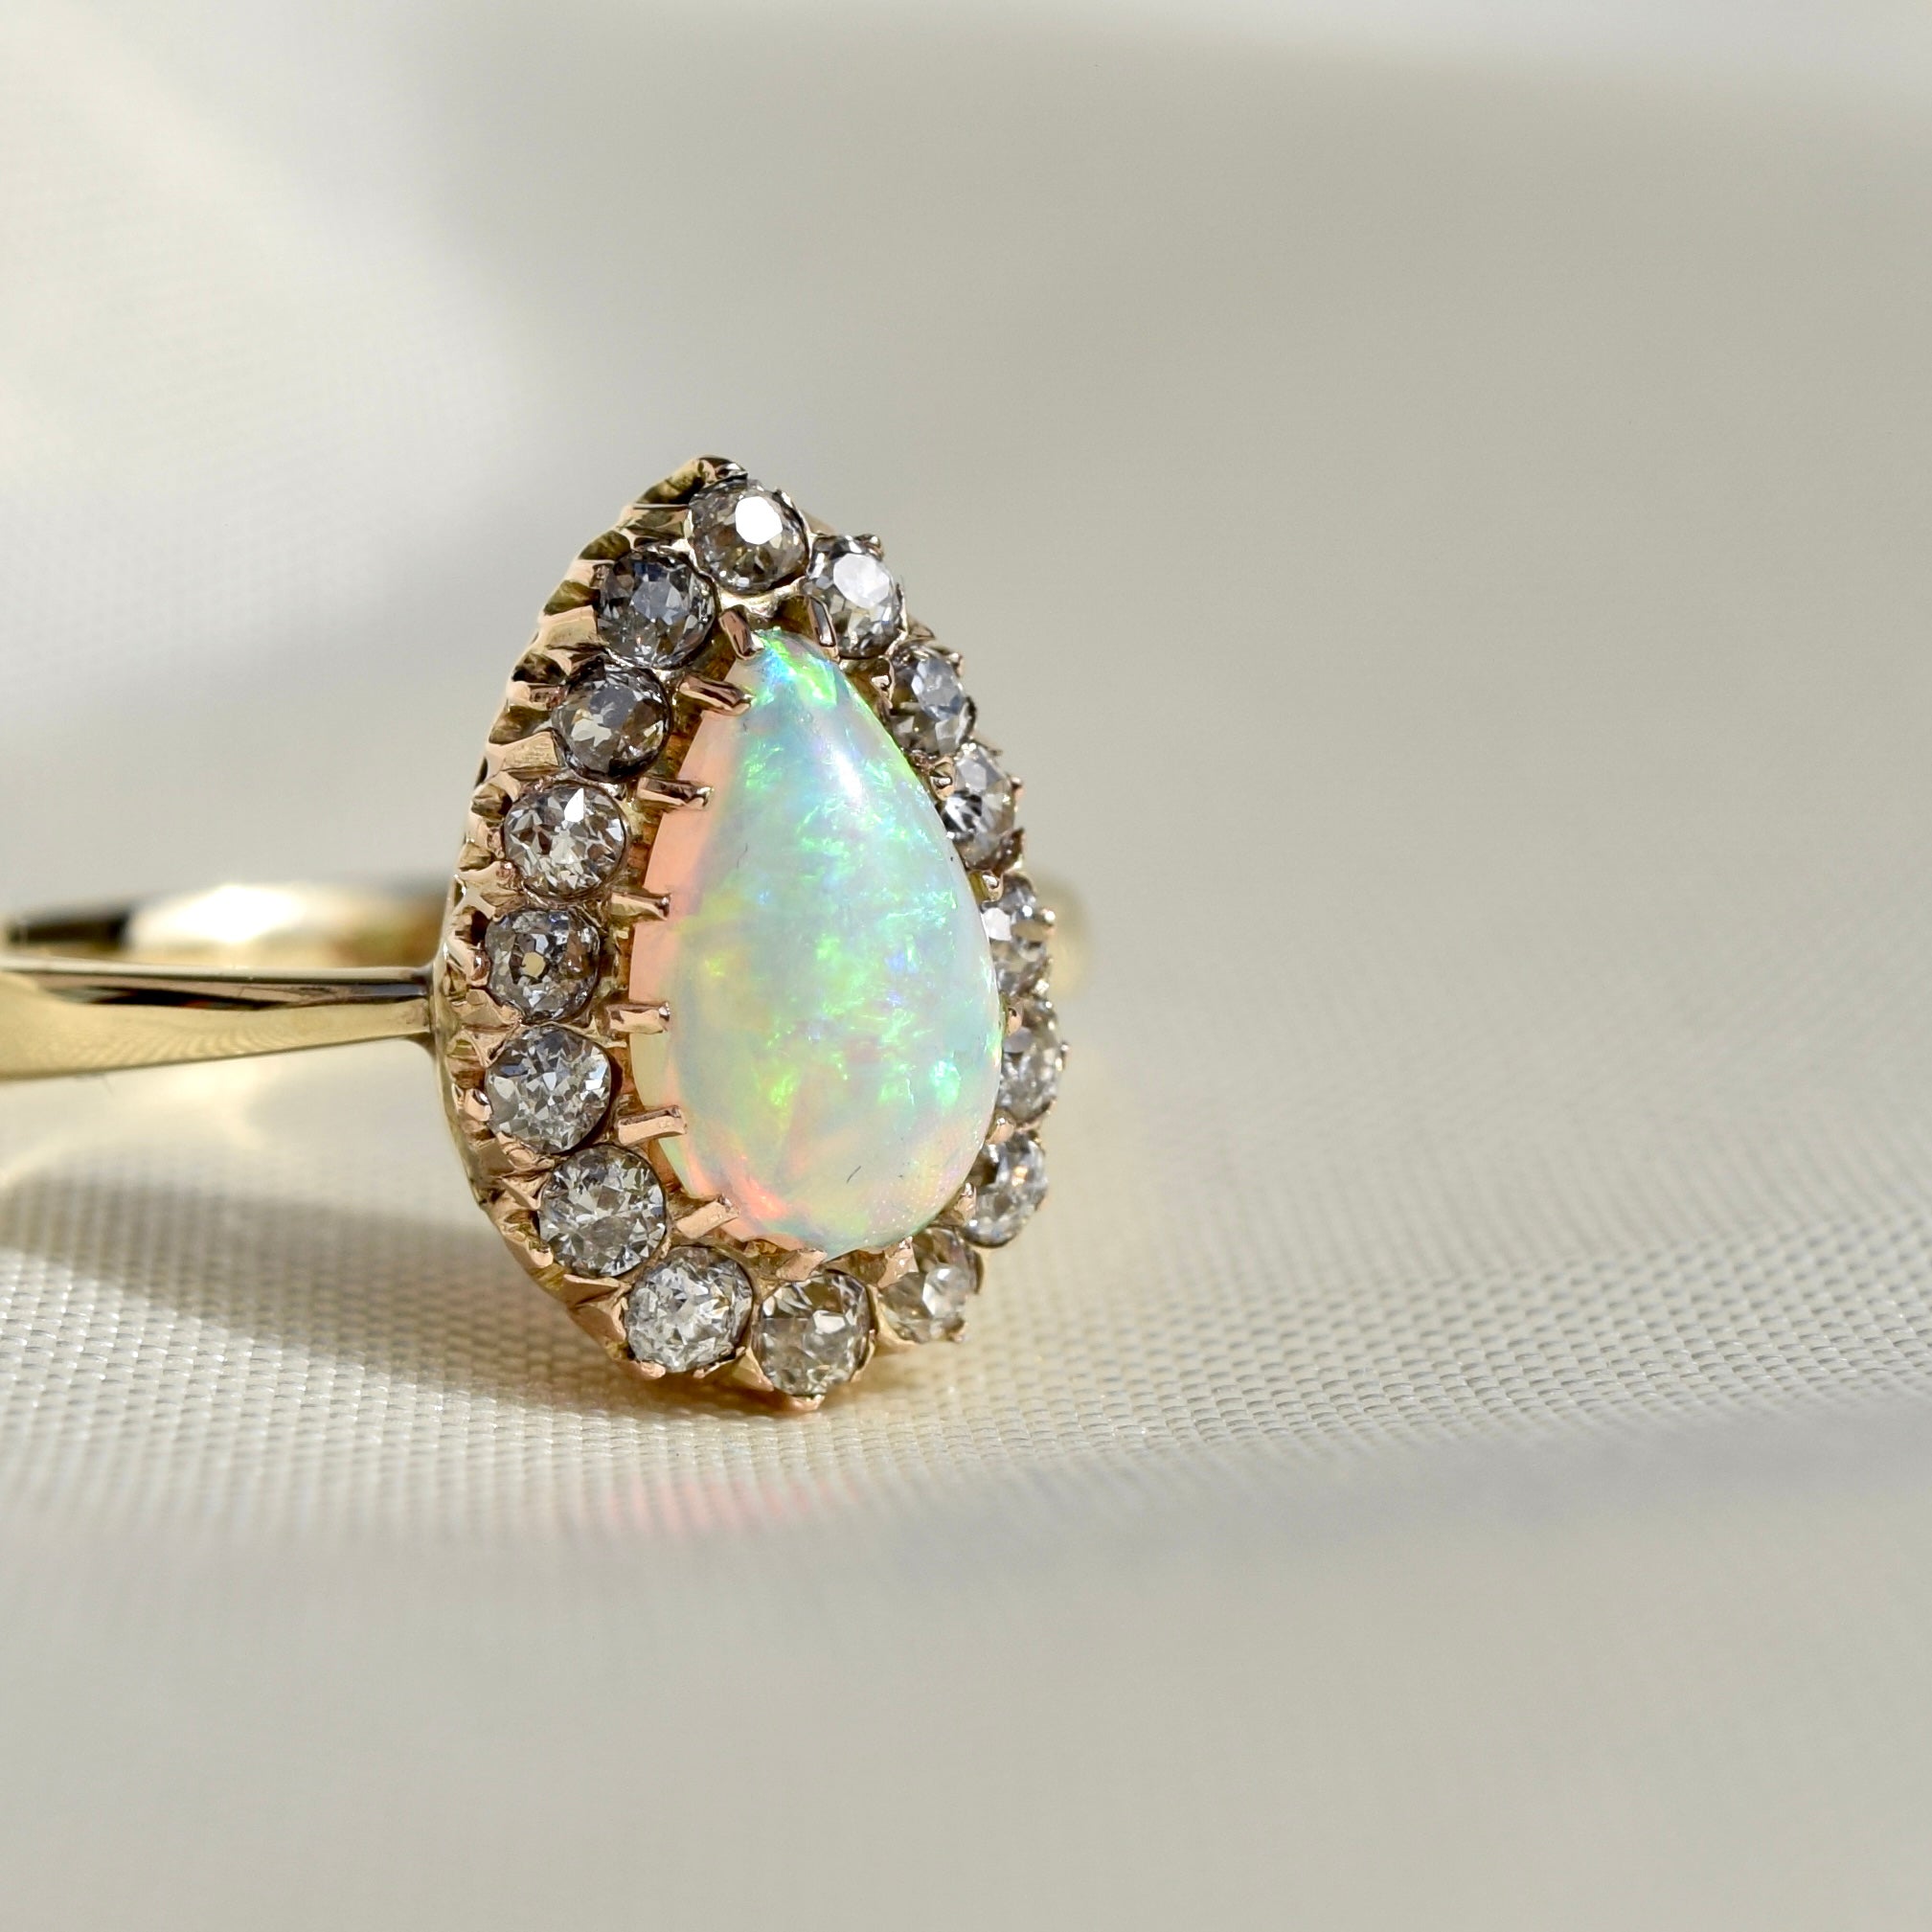 Antique Art Deco White Opal and Diamond Ring in 14k White Gold | Size